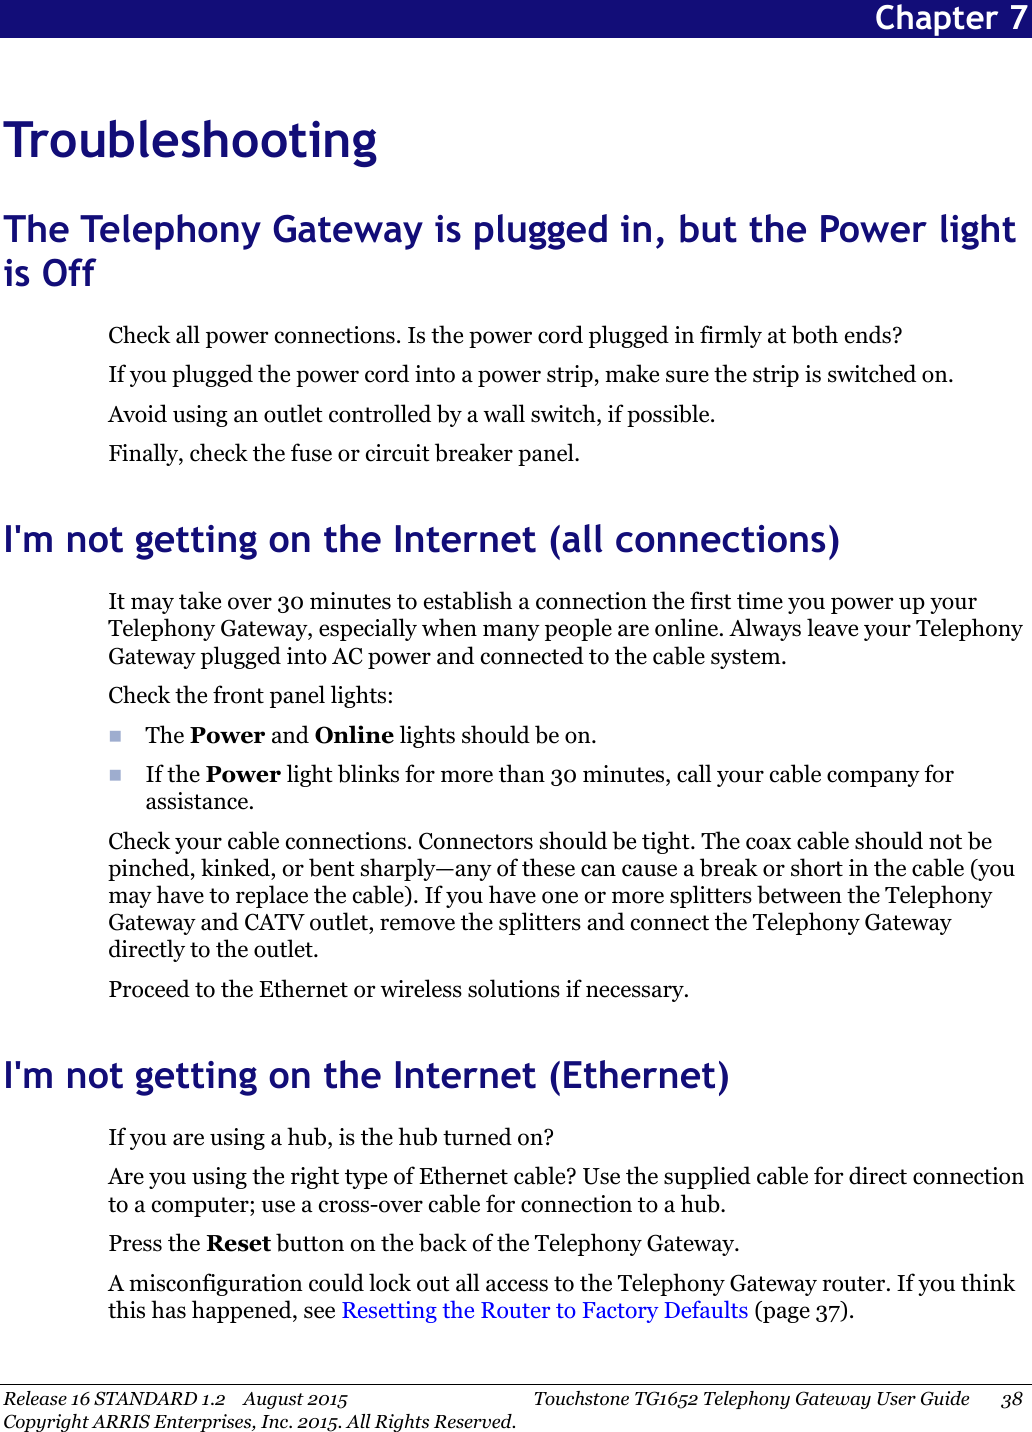 Release 16 STANDARD 1.2 August 2015 Touchstone TG1652 Telephony Gateway User Guide 38Copyright ARRIS Enterprises, Inc. 2015. All Rights Reserved.Chapter 7TroubleshootingThe Telephony Gateway is plugged in, but the Power lightis OffCheck all power connections. Is the power cord plugged in firmly at both ends?If you plugged the power cord into a power strip, make sure the strip is switched on.Avoid using an outlet controlled by a wall switch, if possible.Finally, check the fuse or circuit breaker panel.I&apos;m not getting on the Internet (all connections)It may take over 30 minutes to establish a connection the first time you power up yourTelephony Gateway, especially when many people are online. Always leave your TelephonyGateway plugged into AC power and connected to the cable system.Check the front panel lights:The Power and Online lights should be on.If the Power light blinks for more than 30 minutes, call your cable company forassistance.Check your cable connections. Connectors should be tight. The coax cable should not bepinched, kinked, or bent sharply—any of these can cause a break or short in the cable (youmay have to replace the cable). If you have one or more splitters between the TelephonyGateway and CATV outlet, remove the splitters and connect the Telephony Gatewaydirectly to the outlet.Proceed to the Ethernet or wireless solutions if necessary.I&apos;m not getting on the Internet (Ethernet)If you are using a hub, is the hub turned on?Are you using the right type of Ethernet cable? Use the supplied cable for direct connectionto a computer; use a cross-over cable for connection to a hub.Press the Reset button on the back of the Telephony Gateway.A misconfiguration could lock out all access to the Telephony Gateway router. If you thinkthis has happened, see Resetting the Router to Factory Defaults (page 37).